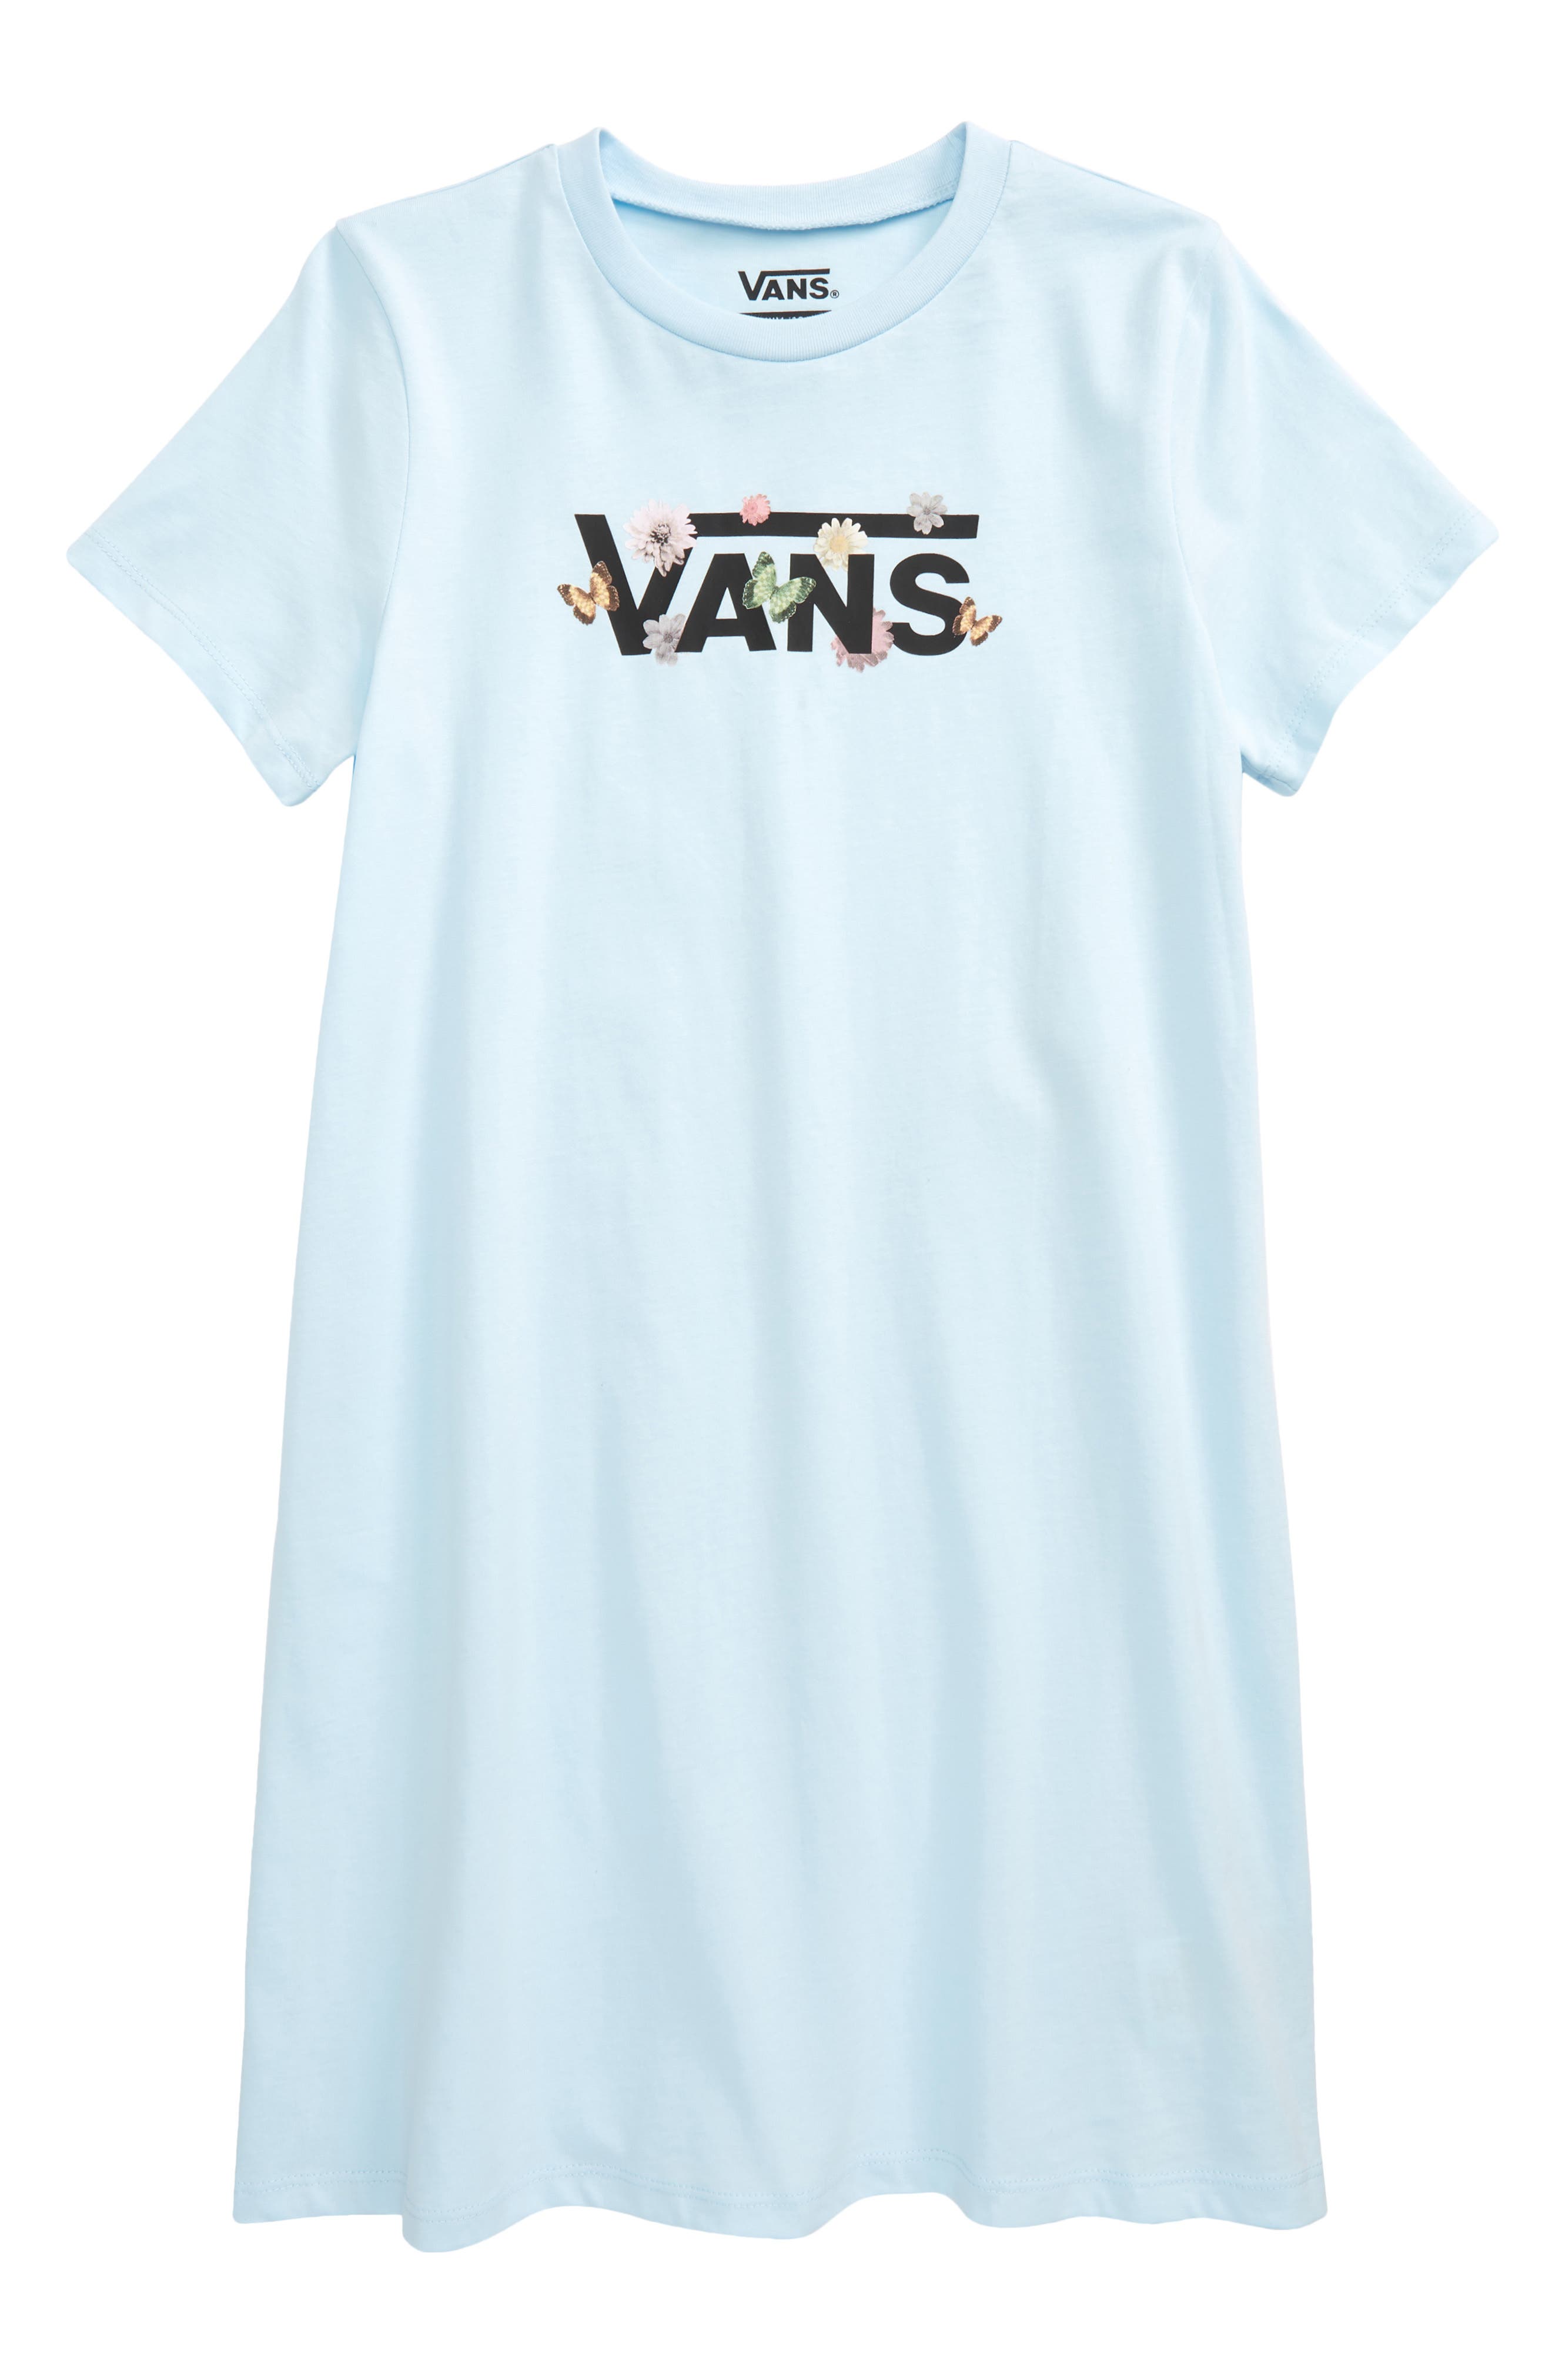 Vans Kids' Butterfly Floral Print Cotton Graphic T-Shirt Dress in Delicate Blue